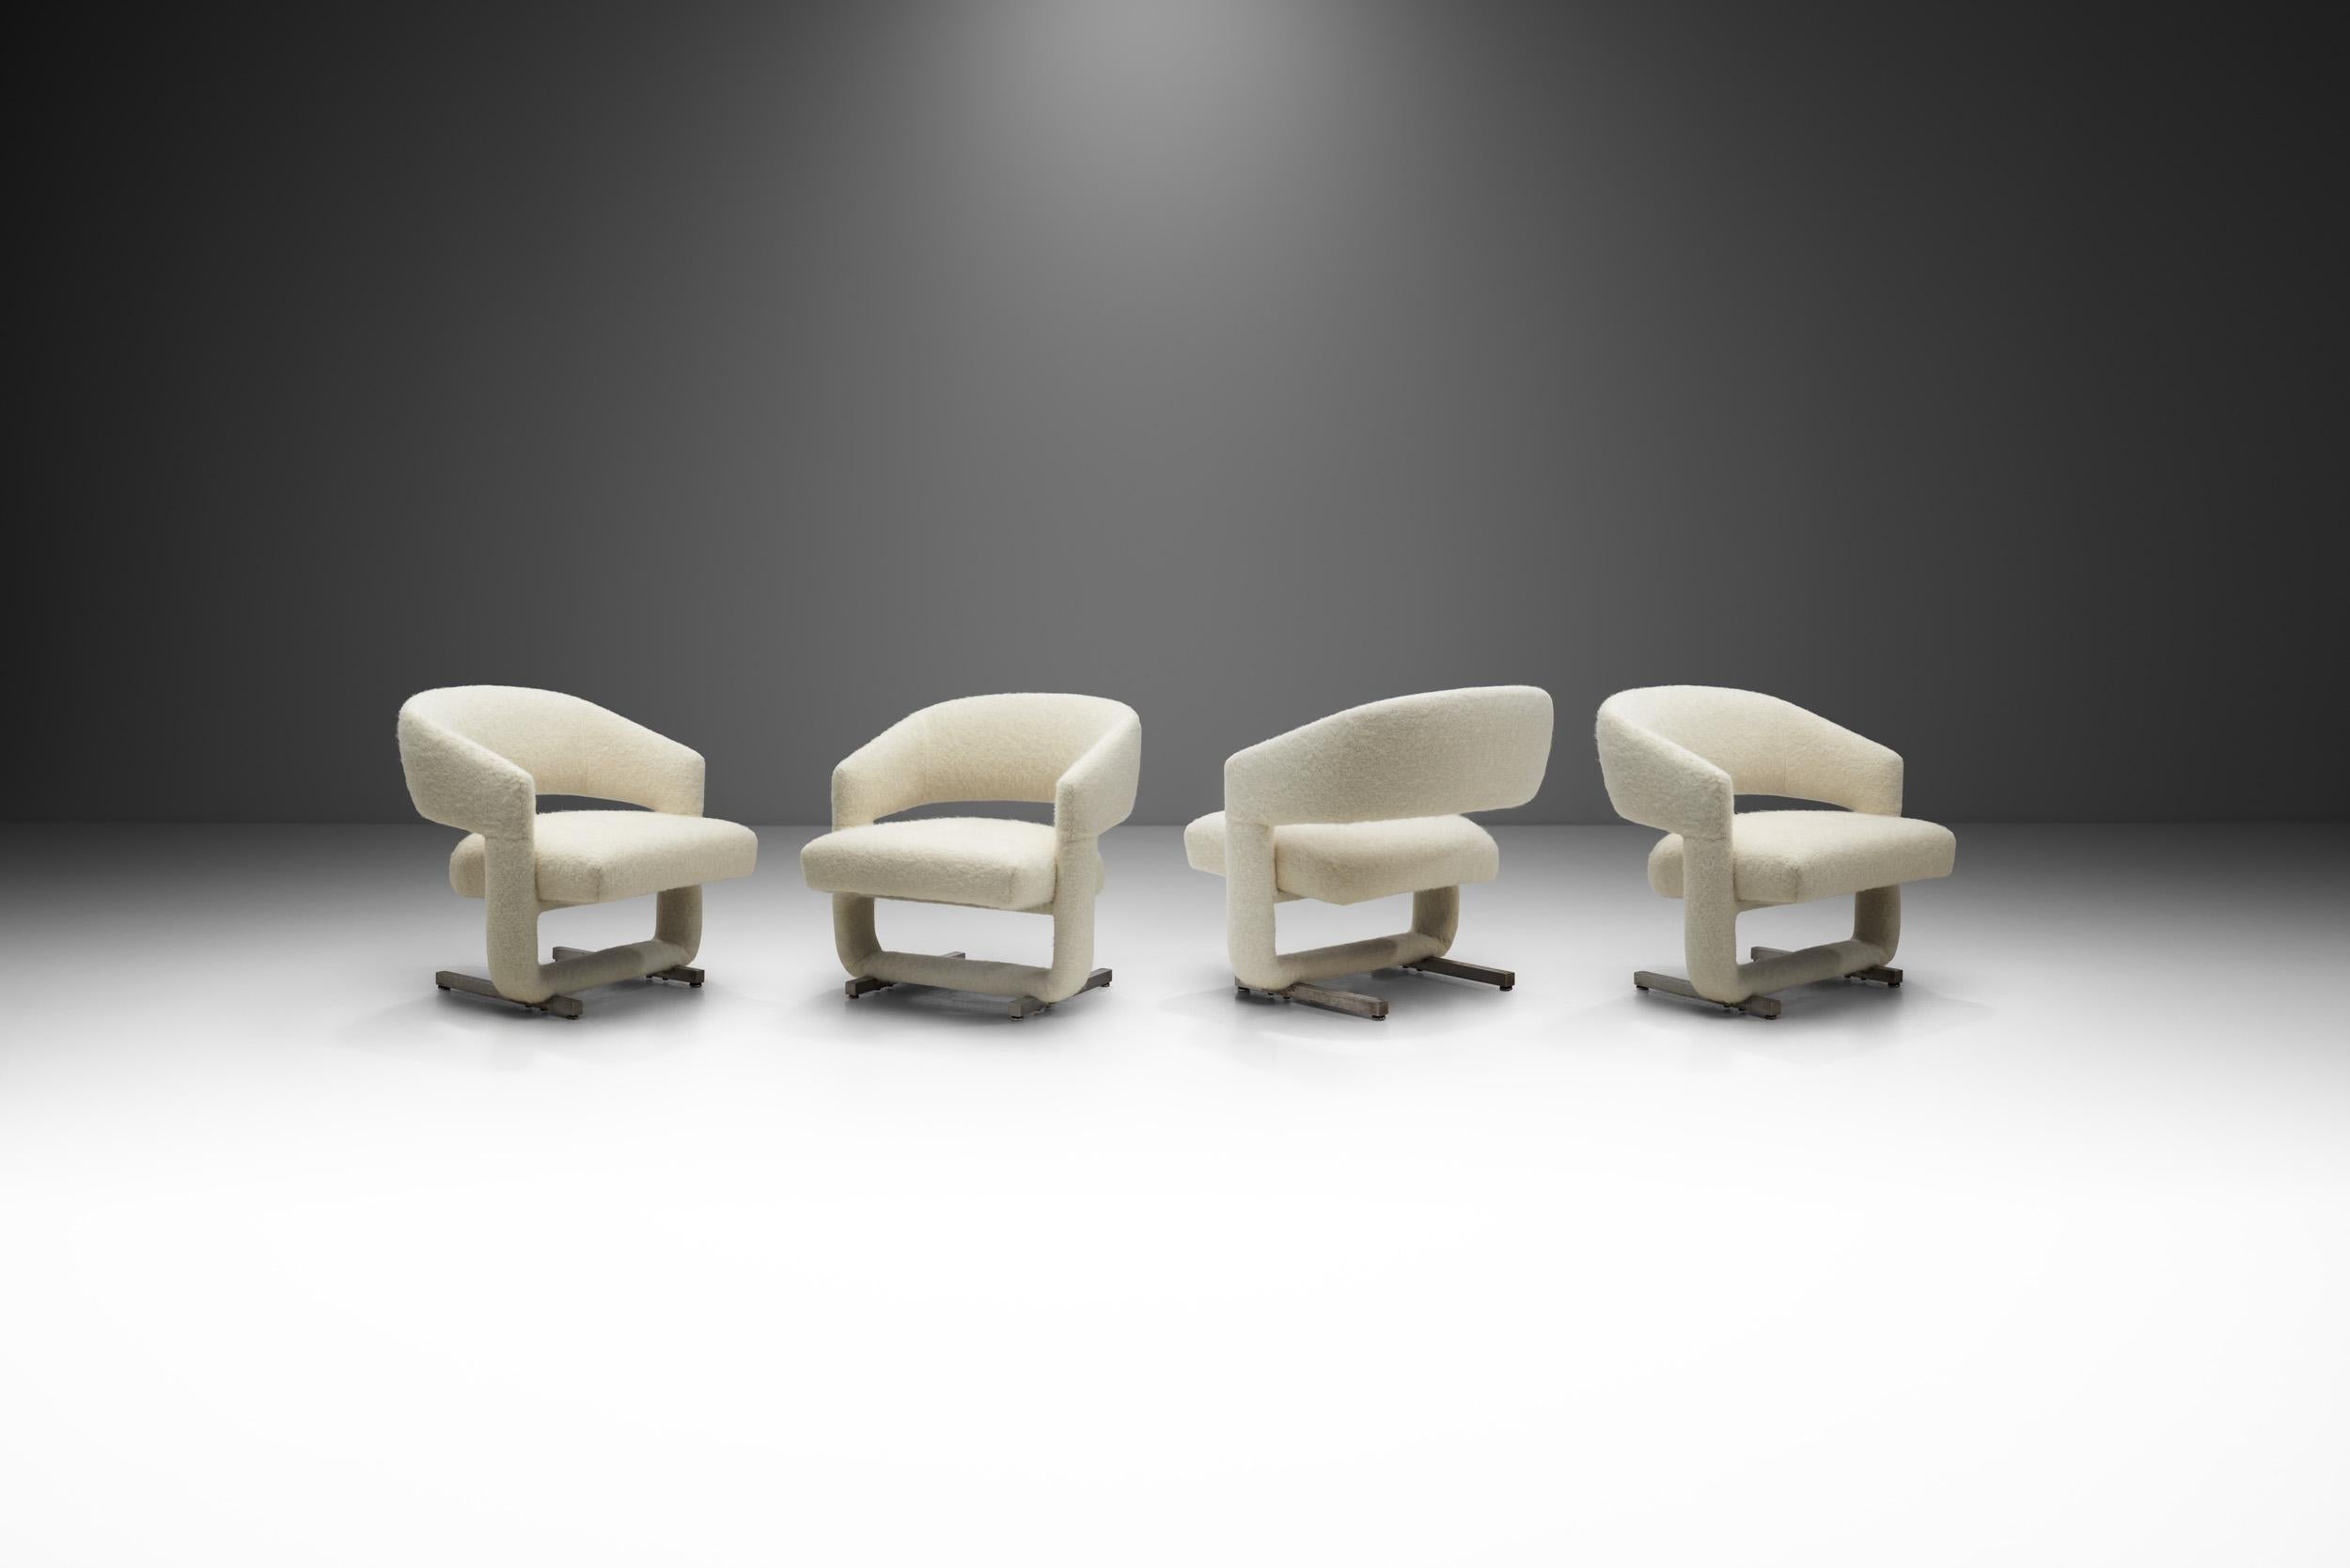 Among the many excellent European mid-century modern designs, some were well-known for their flair for the dramatic, which becomes evident upon looking at this set of four accent chairs. In many ways, it transcends the words “unique” or